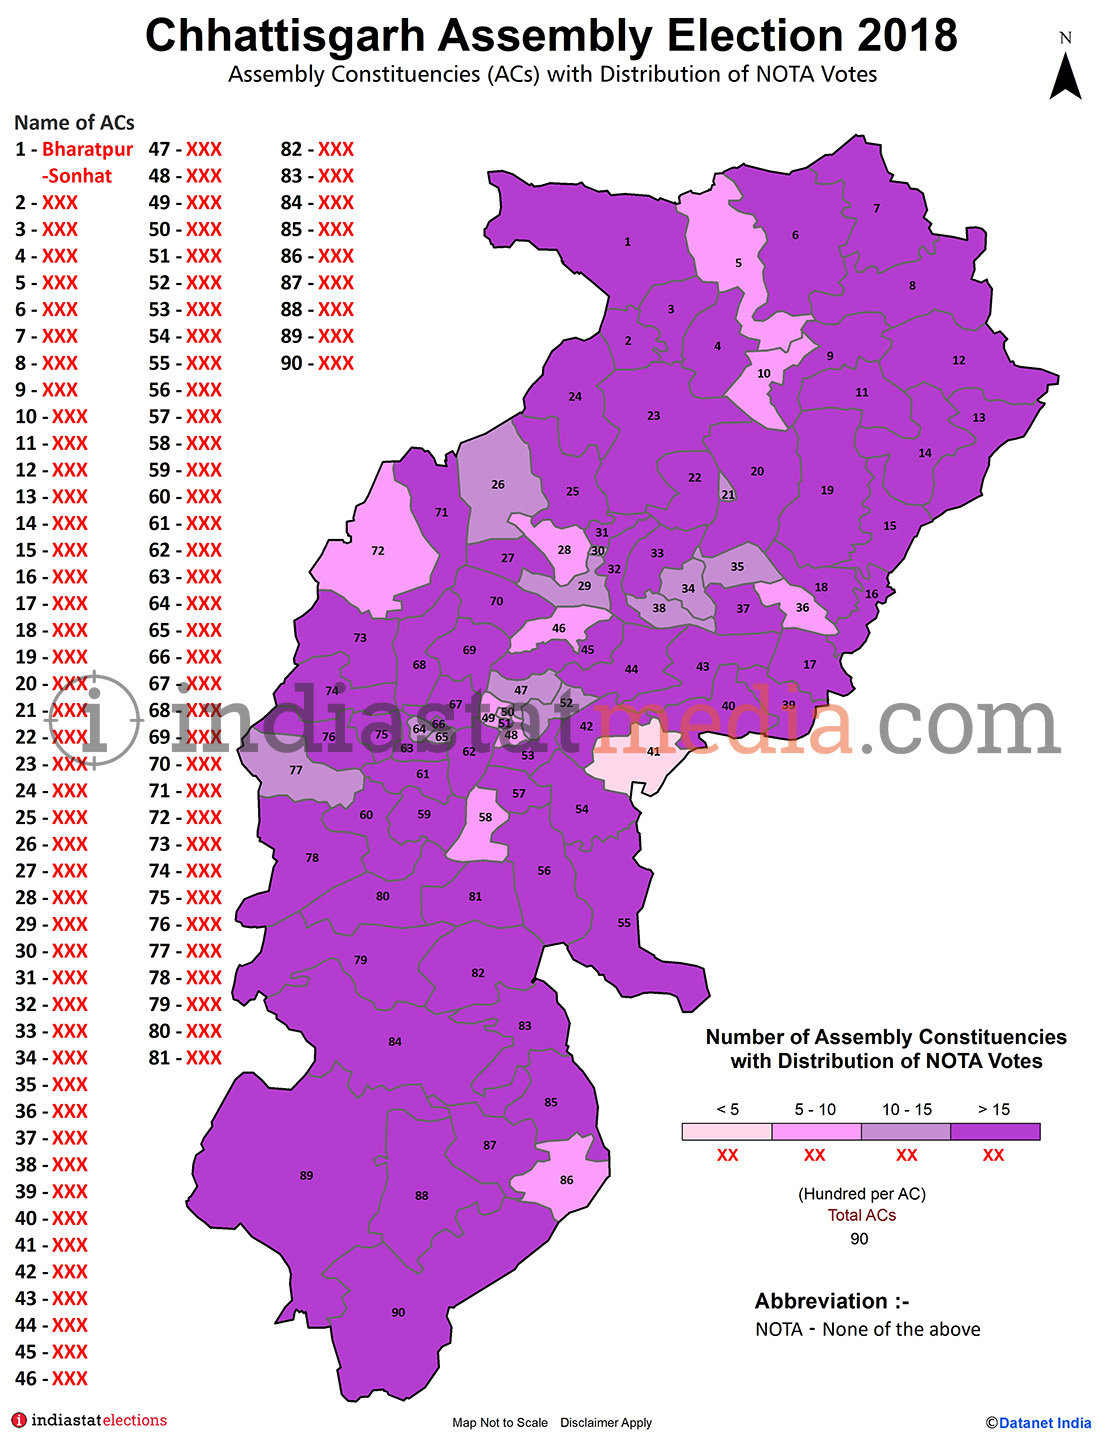 Distribution of NOTA Votes by Constituencies in Chhattisgarh (Assembly Election - 2018)